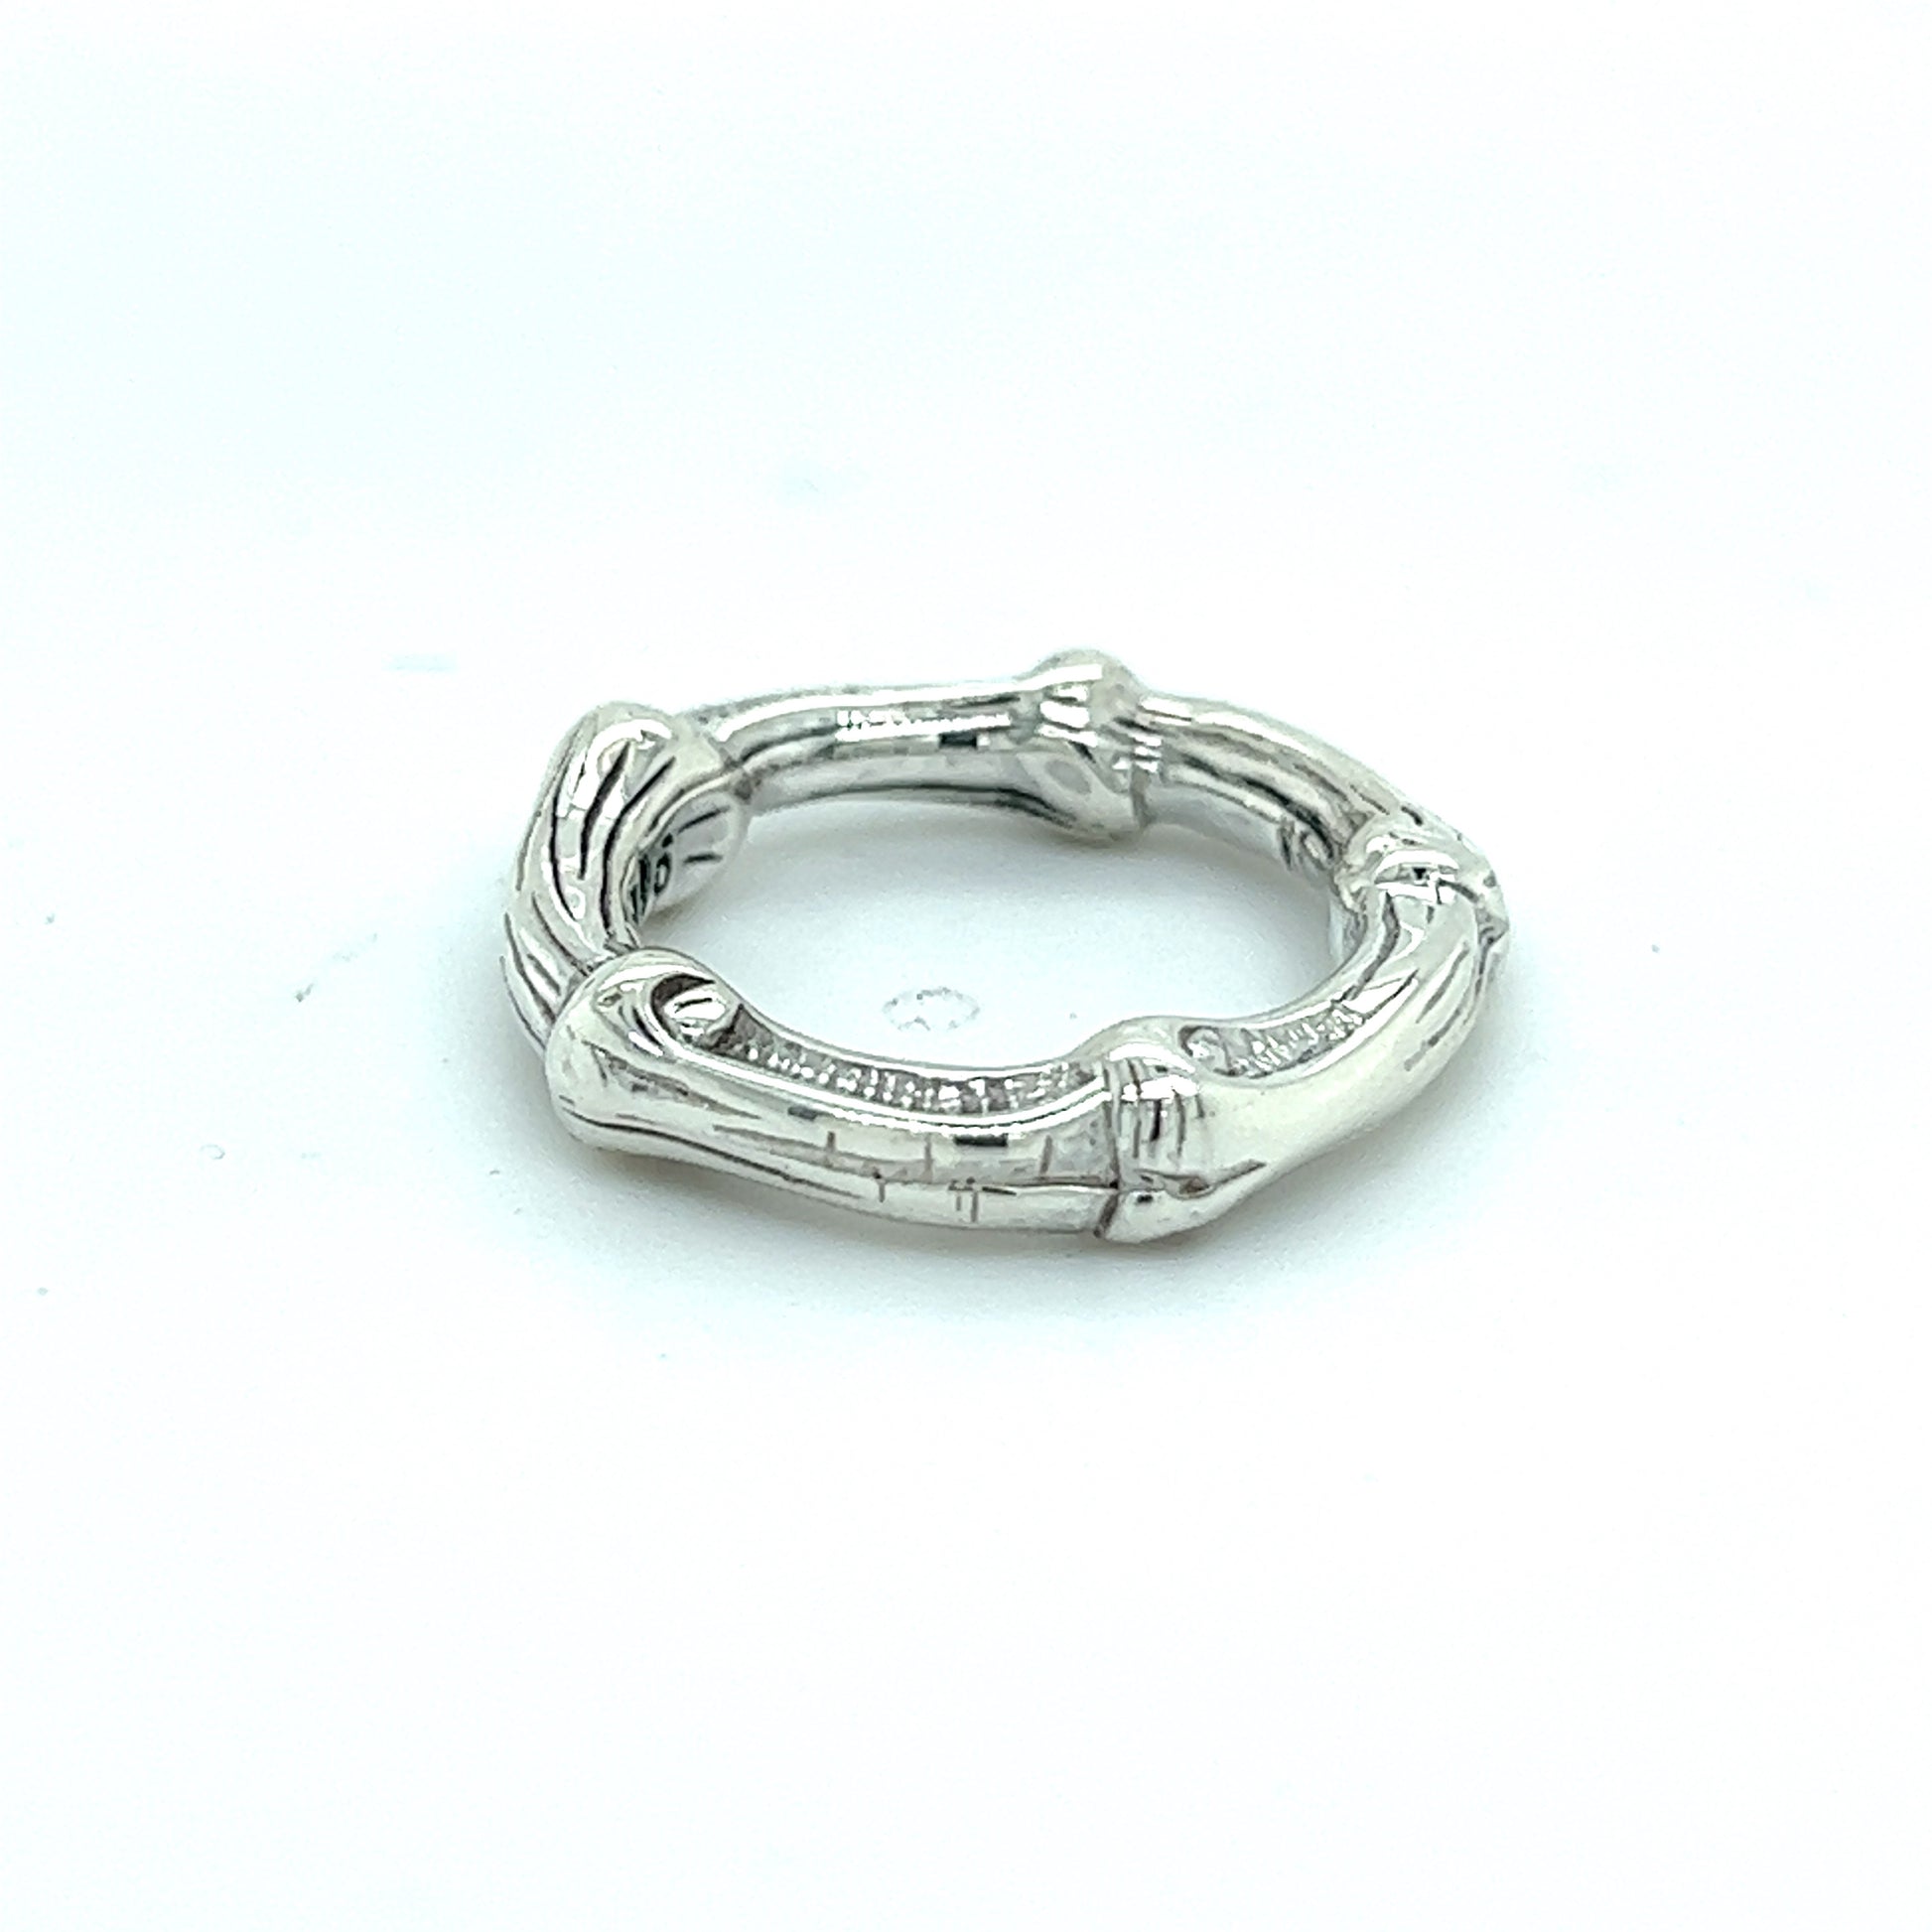 Tiffany & Co Estate Bamboo Ring Size 4 Sterling Silver 4.5 mm TIF452 - Certified Fine Jewelry